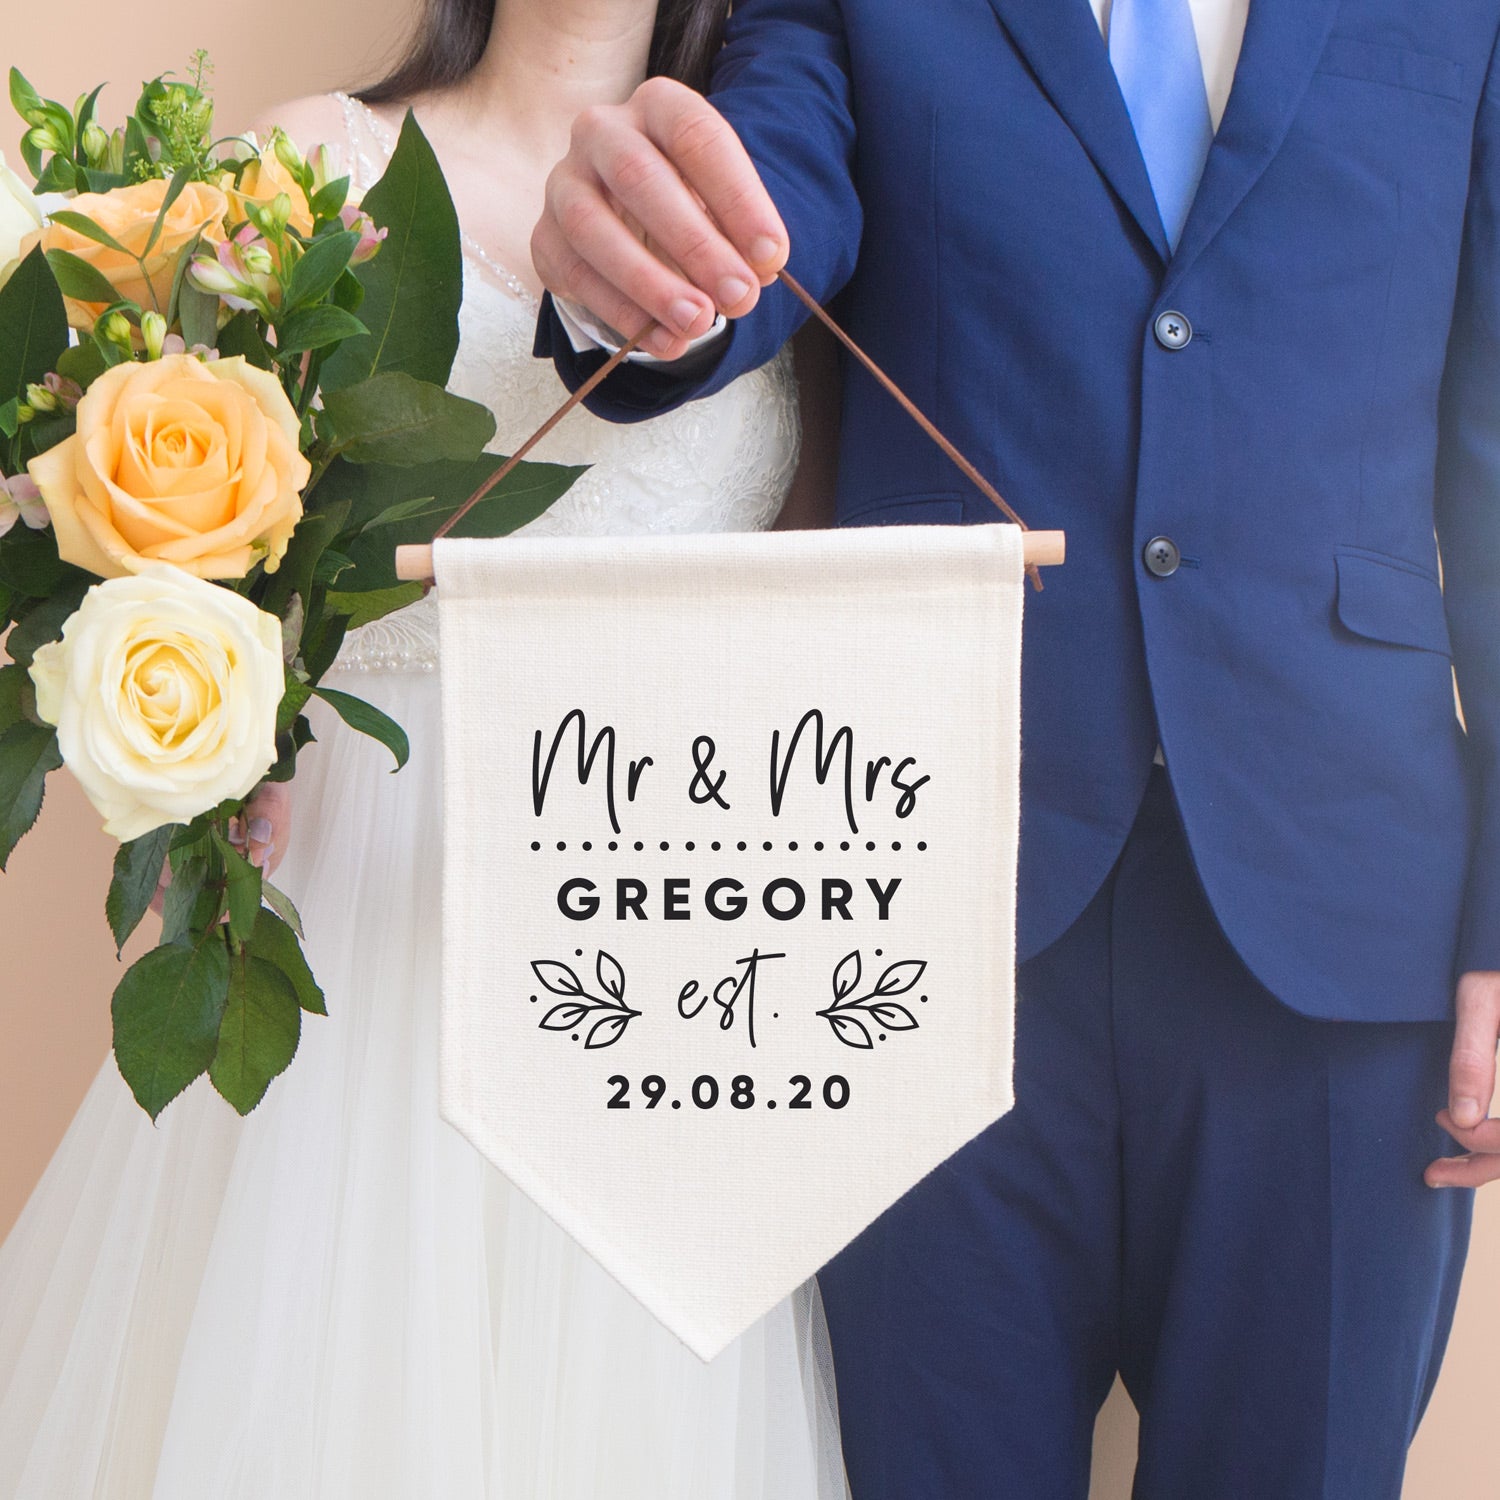 A personalised wedding pennant flag featuring your new title e.g. Mr & Mrs, your new family name and the date that you tied the knot. This linen flag is being held by the groom in a blue suit and the bride is to the left holding a bouquet of peach roses.